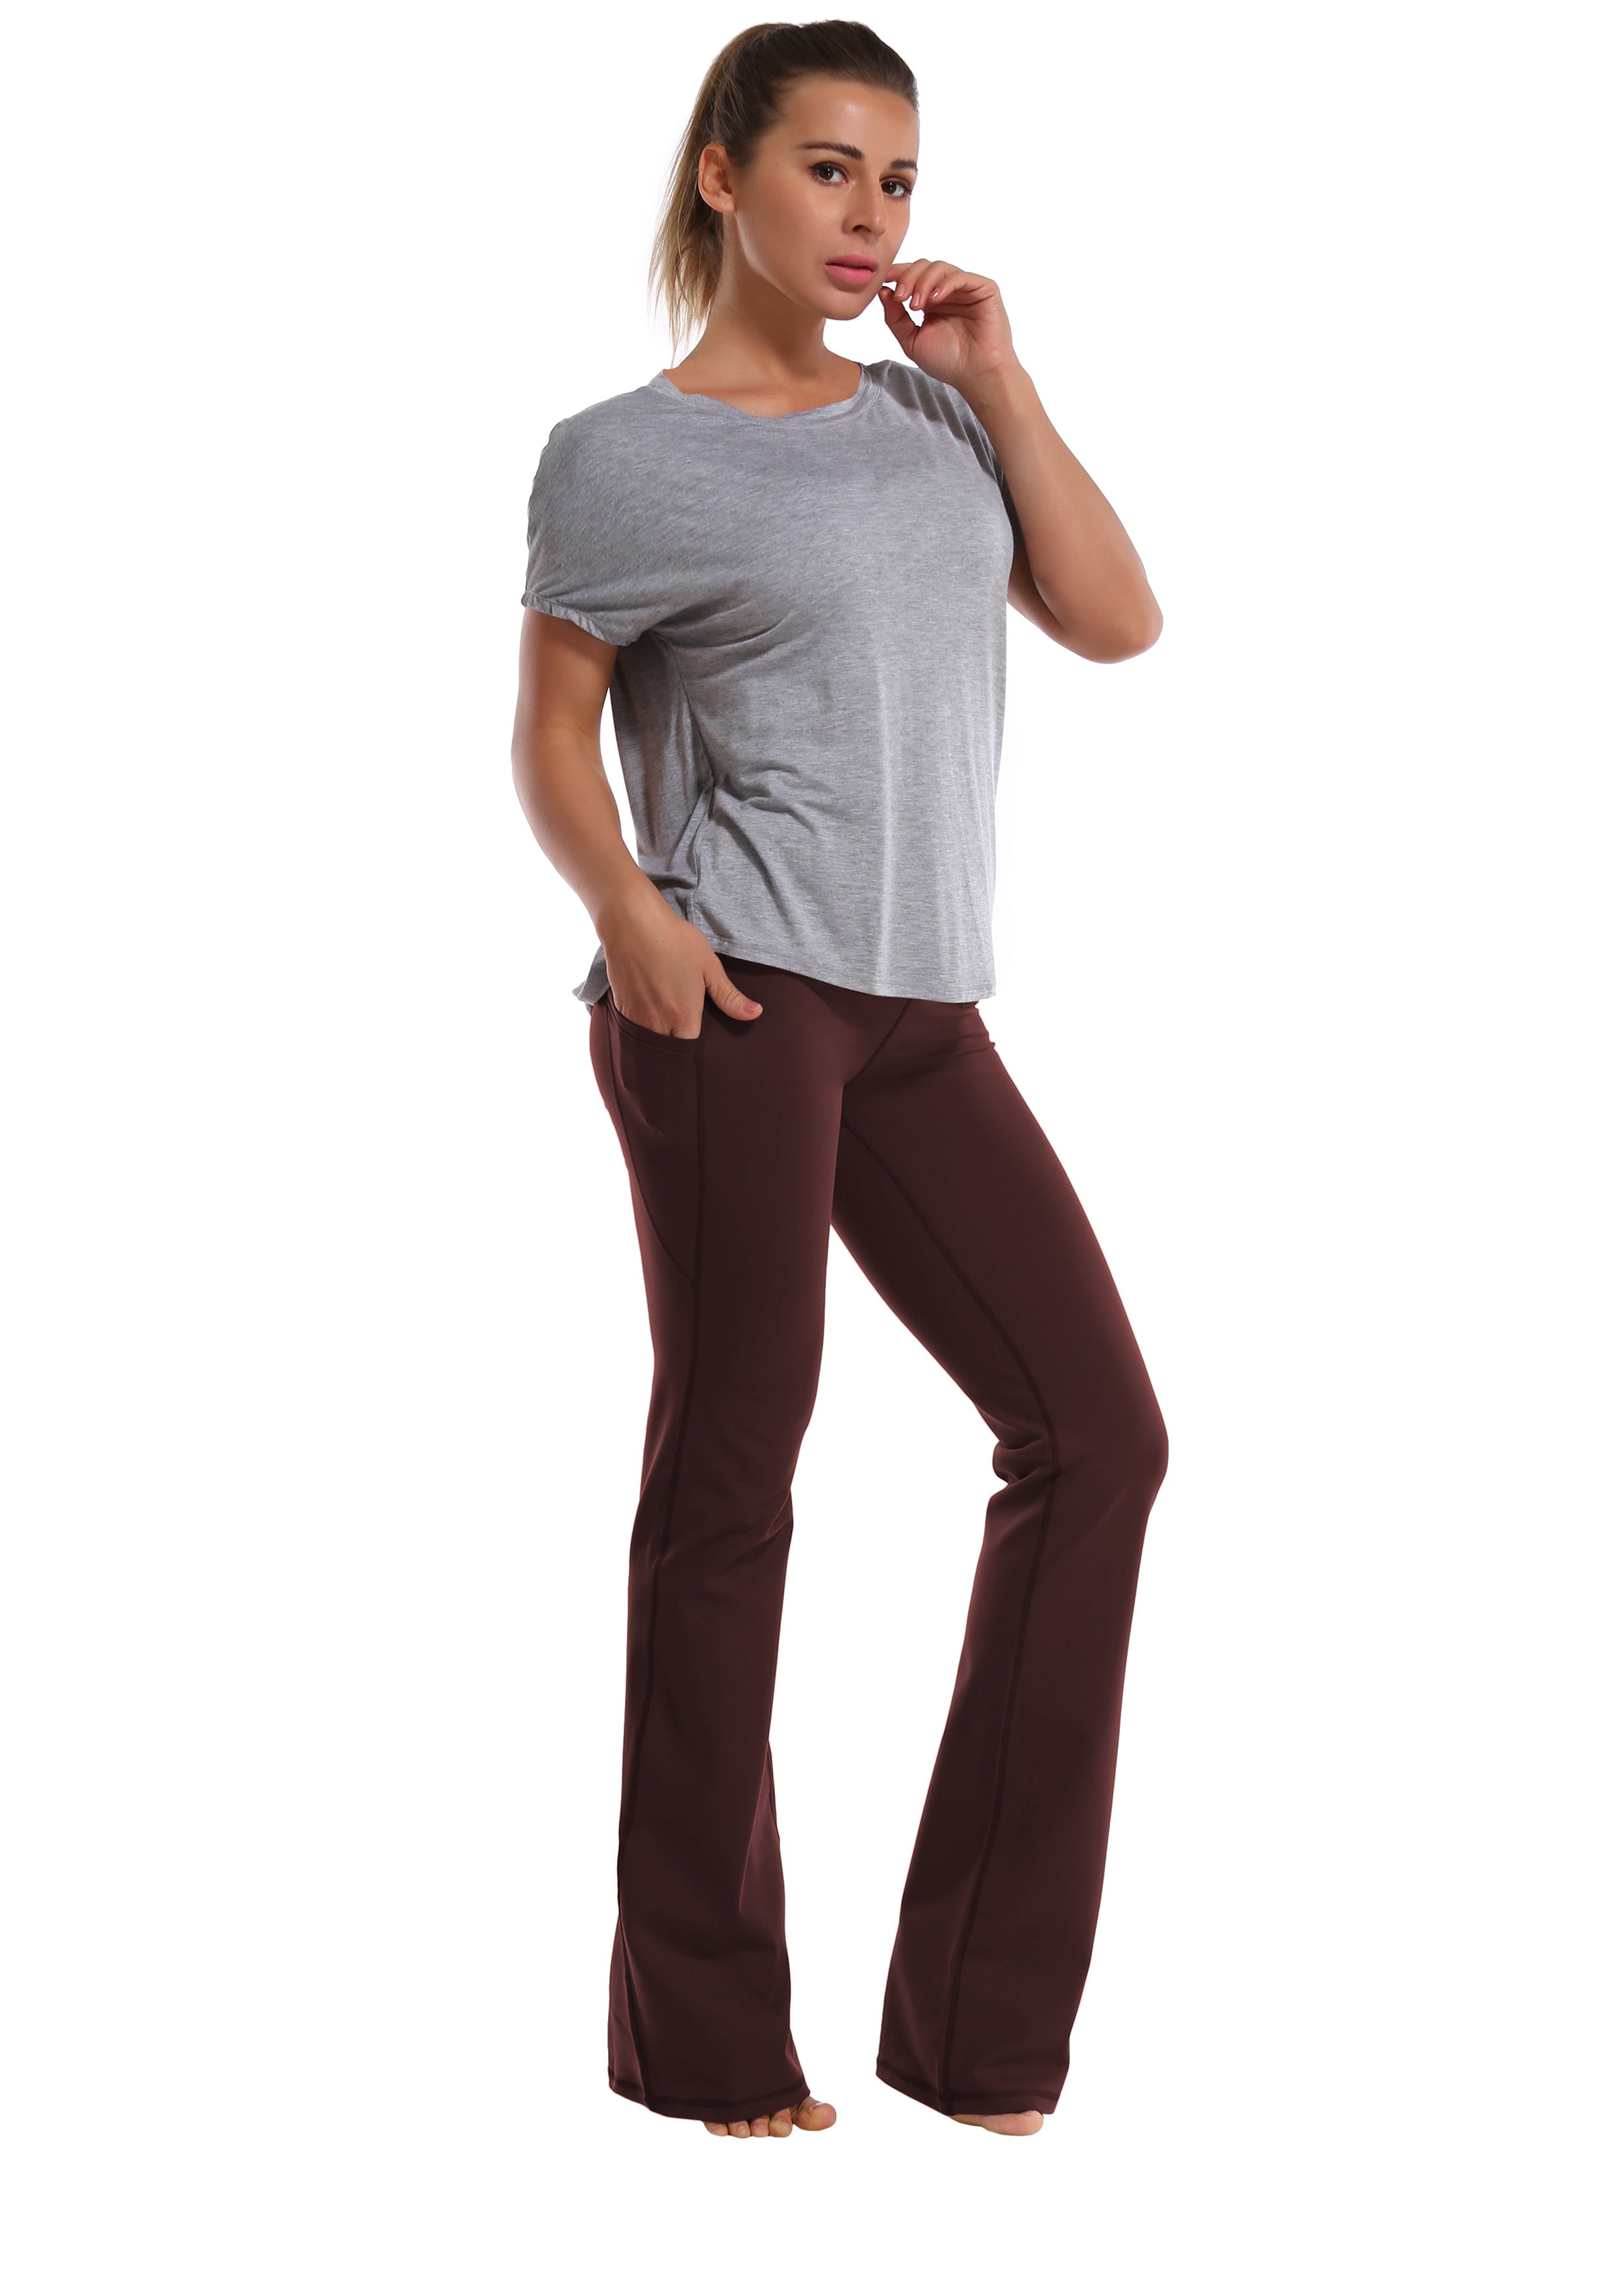 139 Side Pockets Bootcut Leggings mahoganymaroon 87%Nylon/13%Spandex Fabric doesn't attract lint easily 4-way stretch No see-through Moisture-wicking Tummy control Inner pocket Four lengths